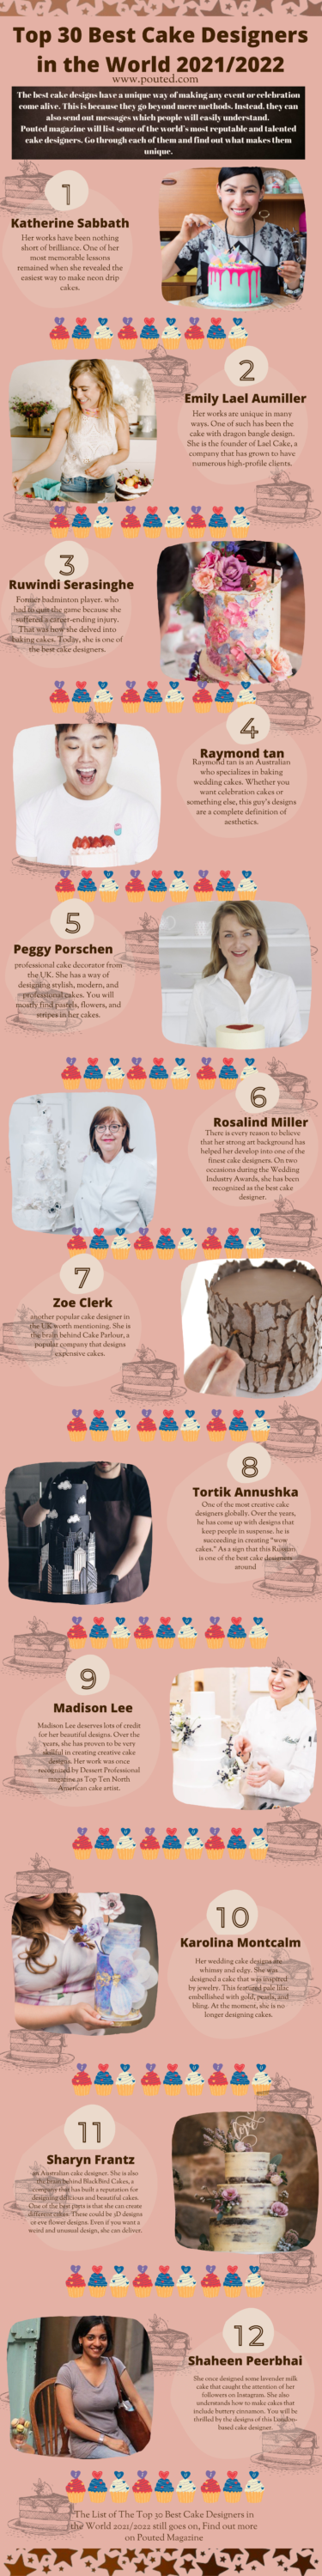 1 Top 30 Best Cake Designers in the World - 52